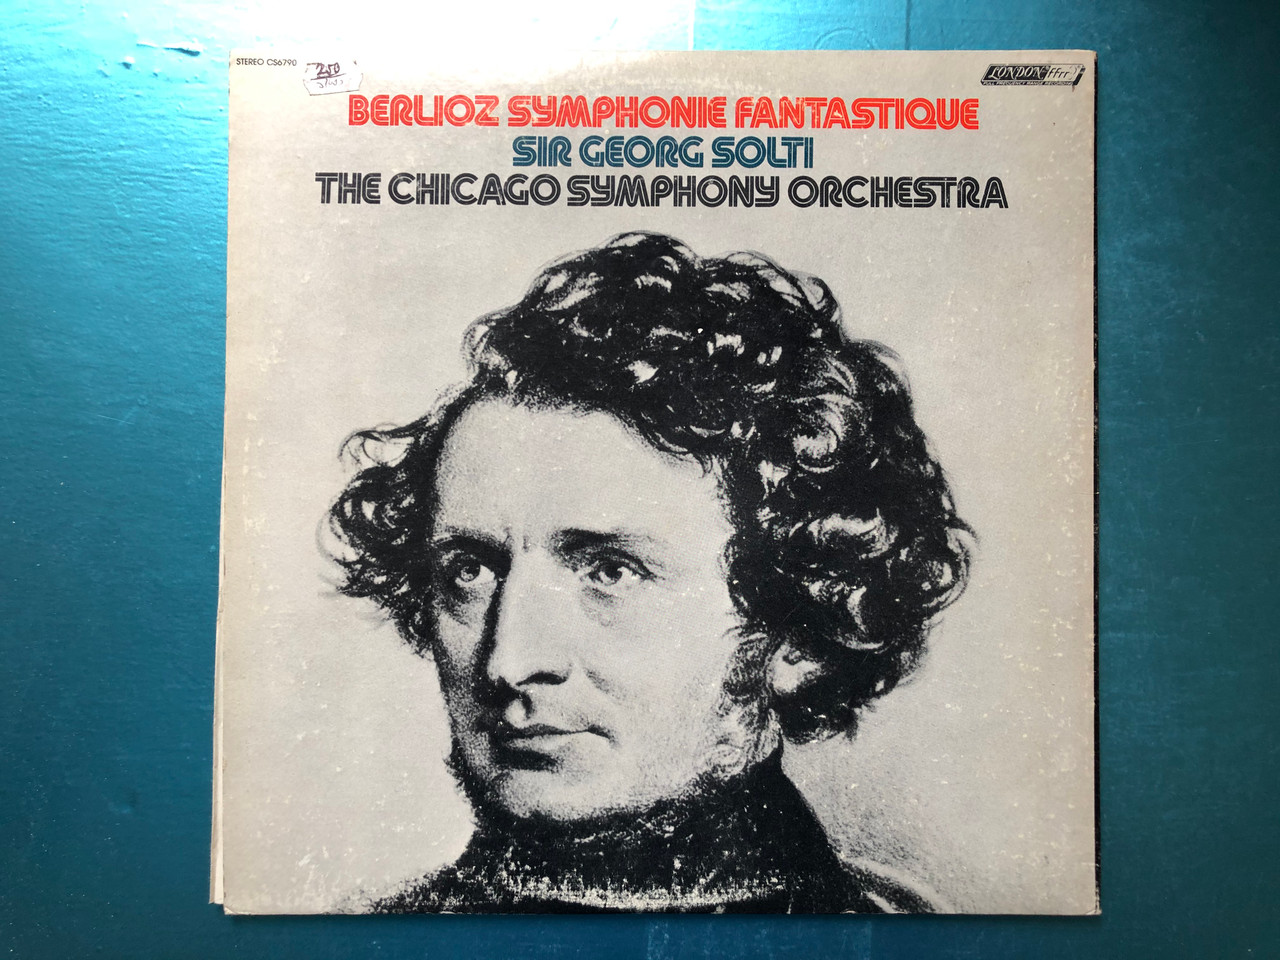 https://cdn10.bigcommerce.com/s-62bdpkt7pb/products/30640/images/181083/Berlioz_Symphonie_Fantastique_-_Sir_Georg_Solti_The_Chicago_Symphony_Orchestra_London_Records_LP_Stereo_CS6790_2__03271.1623350179.1280.1280.JPG?c=2&_ga=2.246380484.1316343633.1623347093-720201591.1623347093